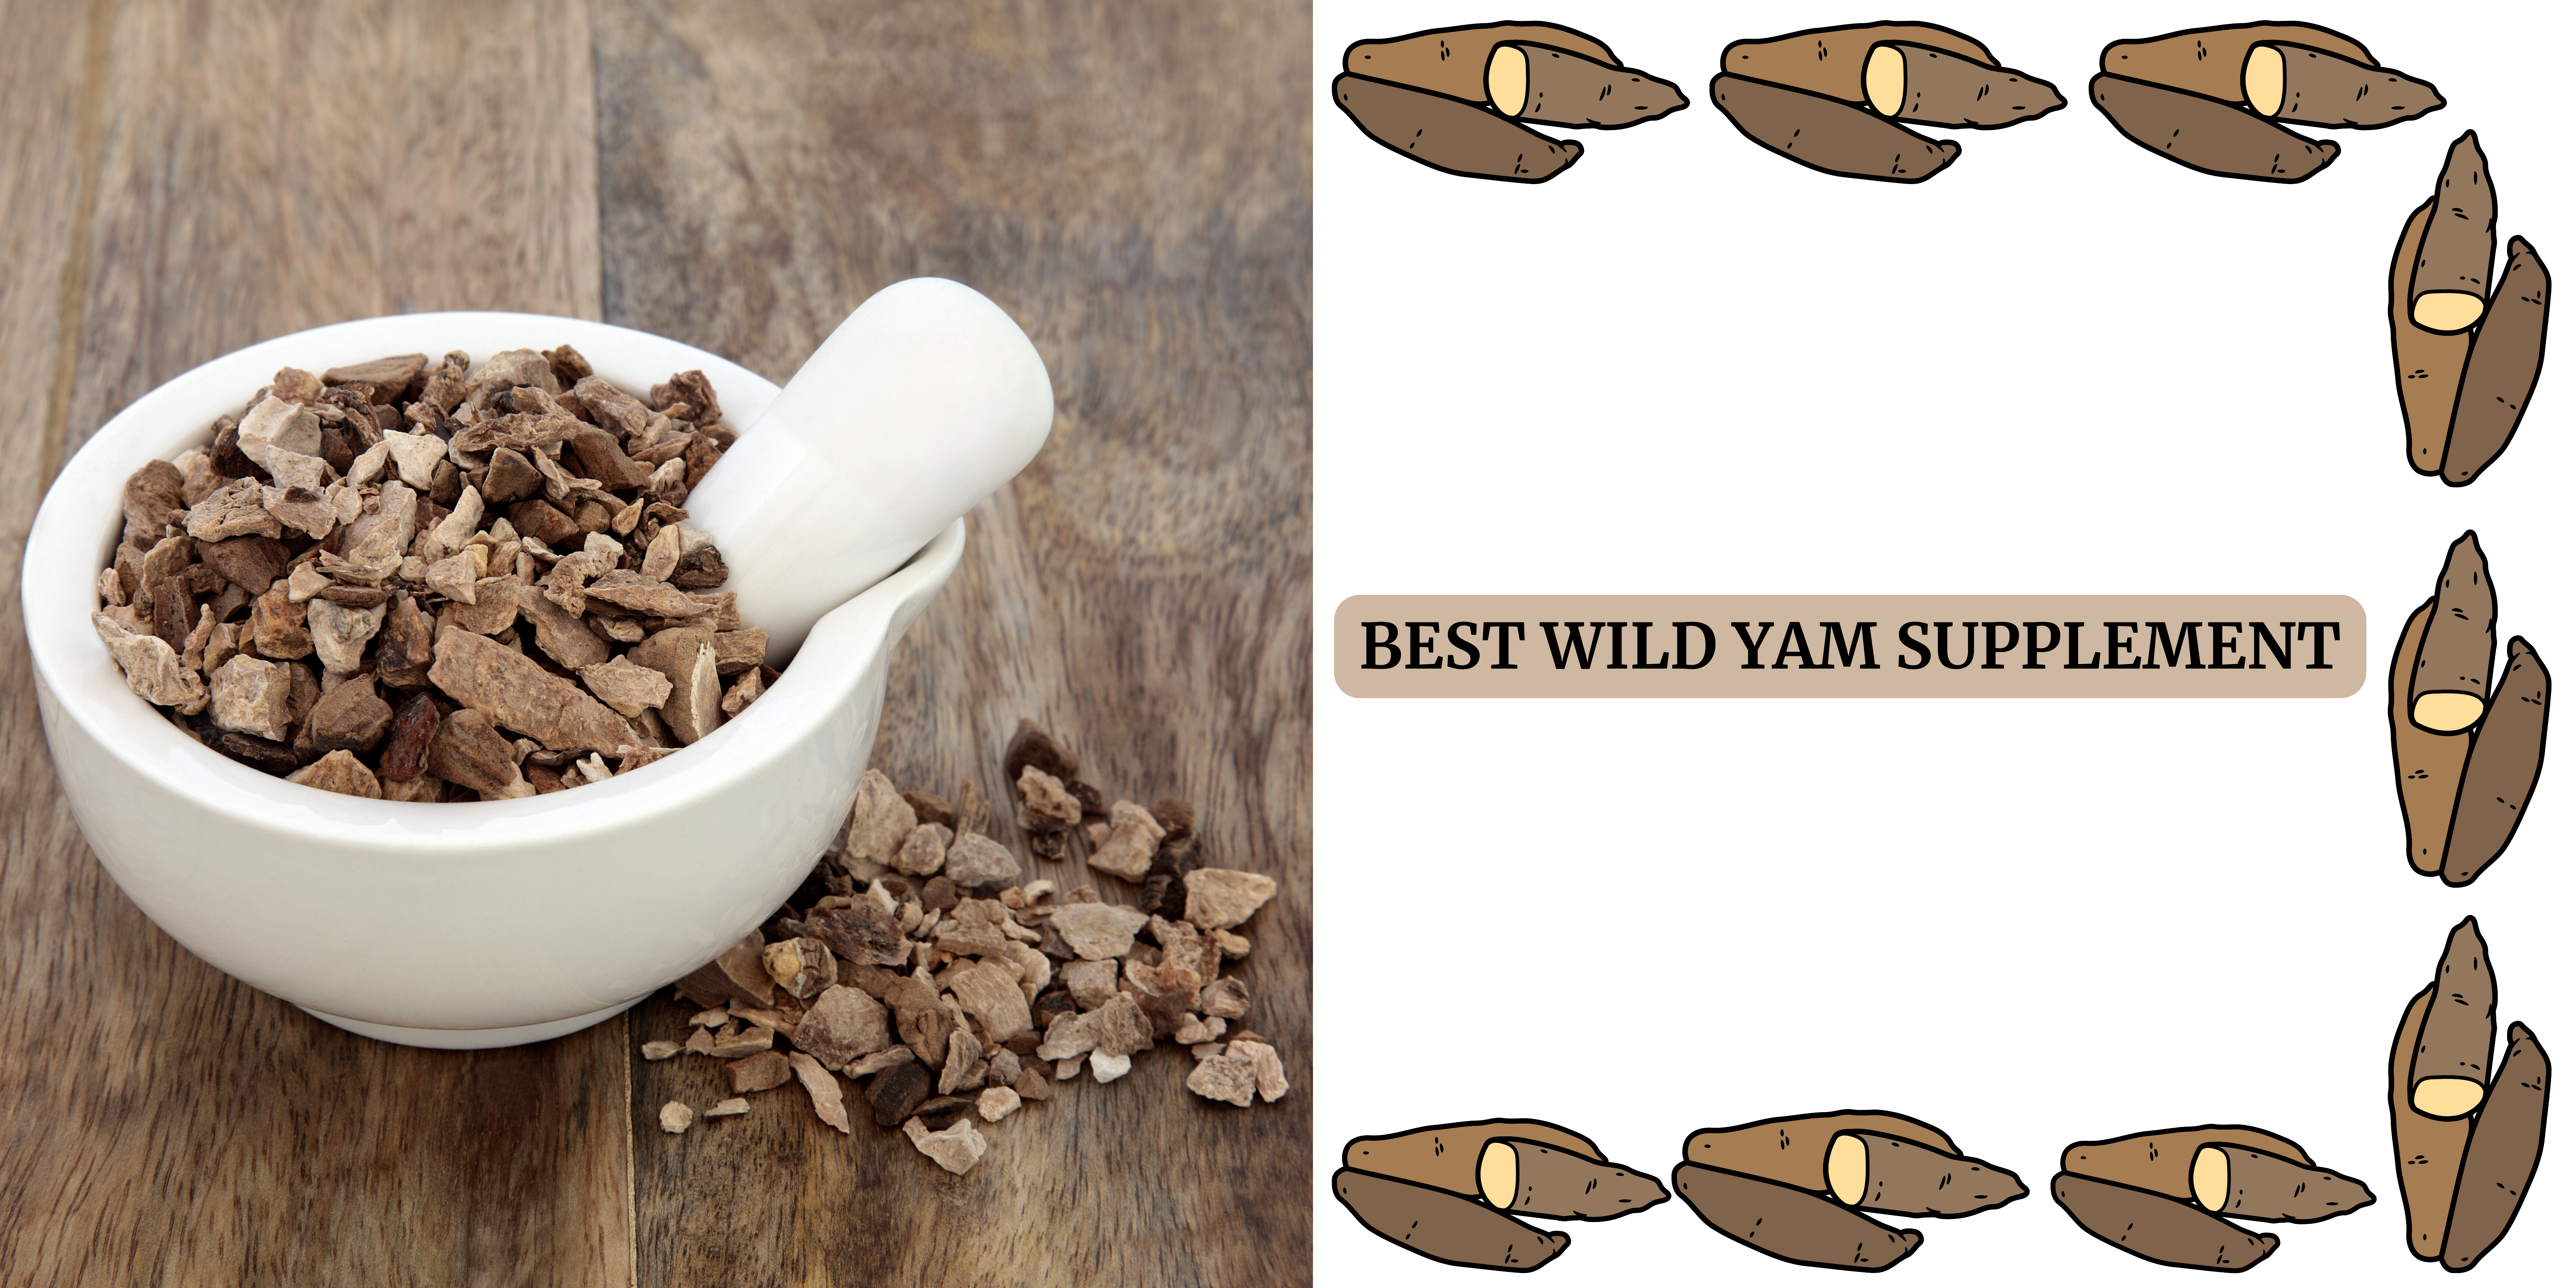 Wild Yam Supplement in Germany